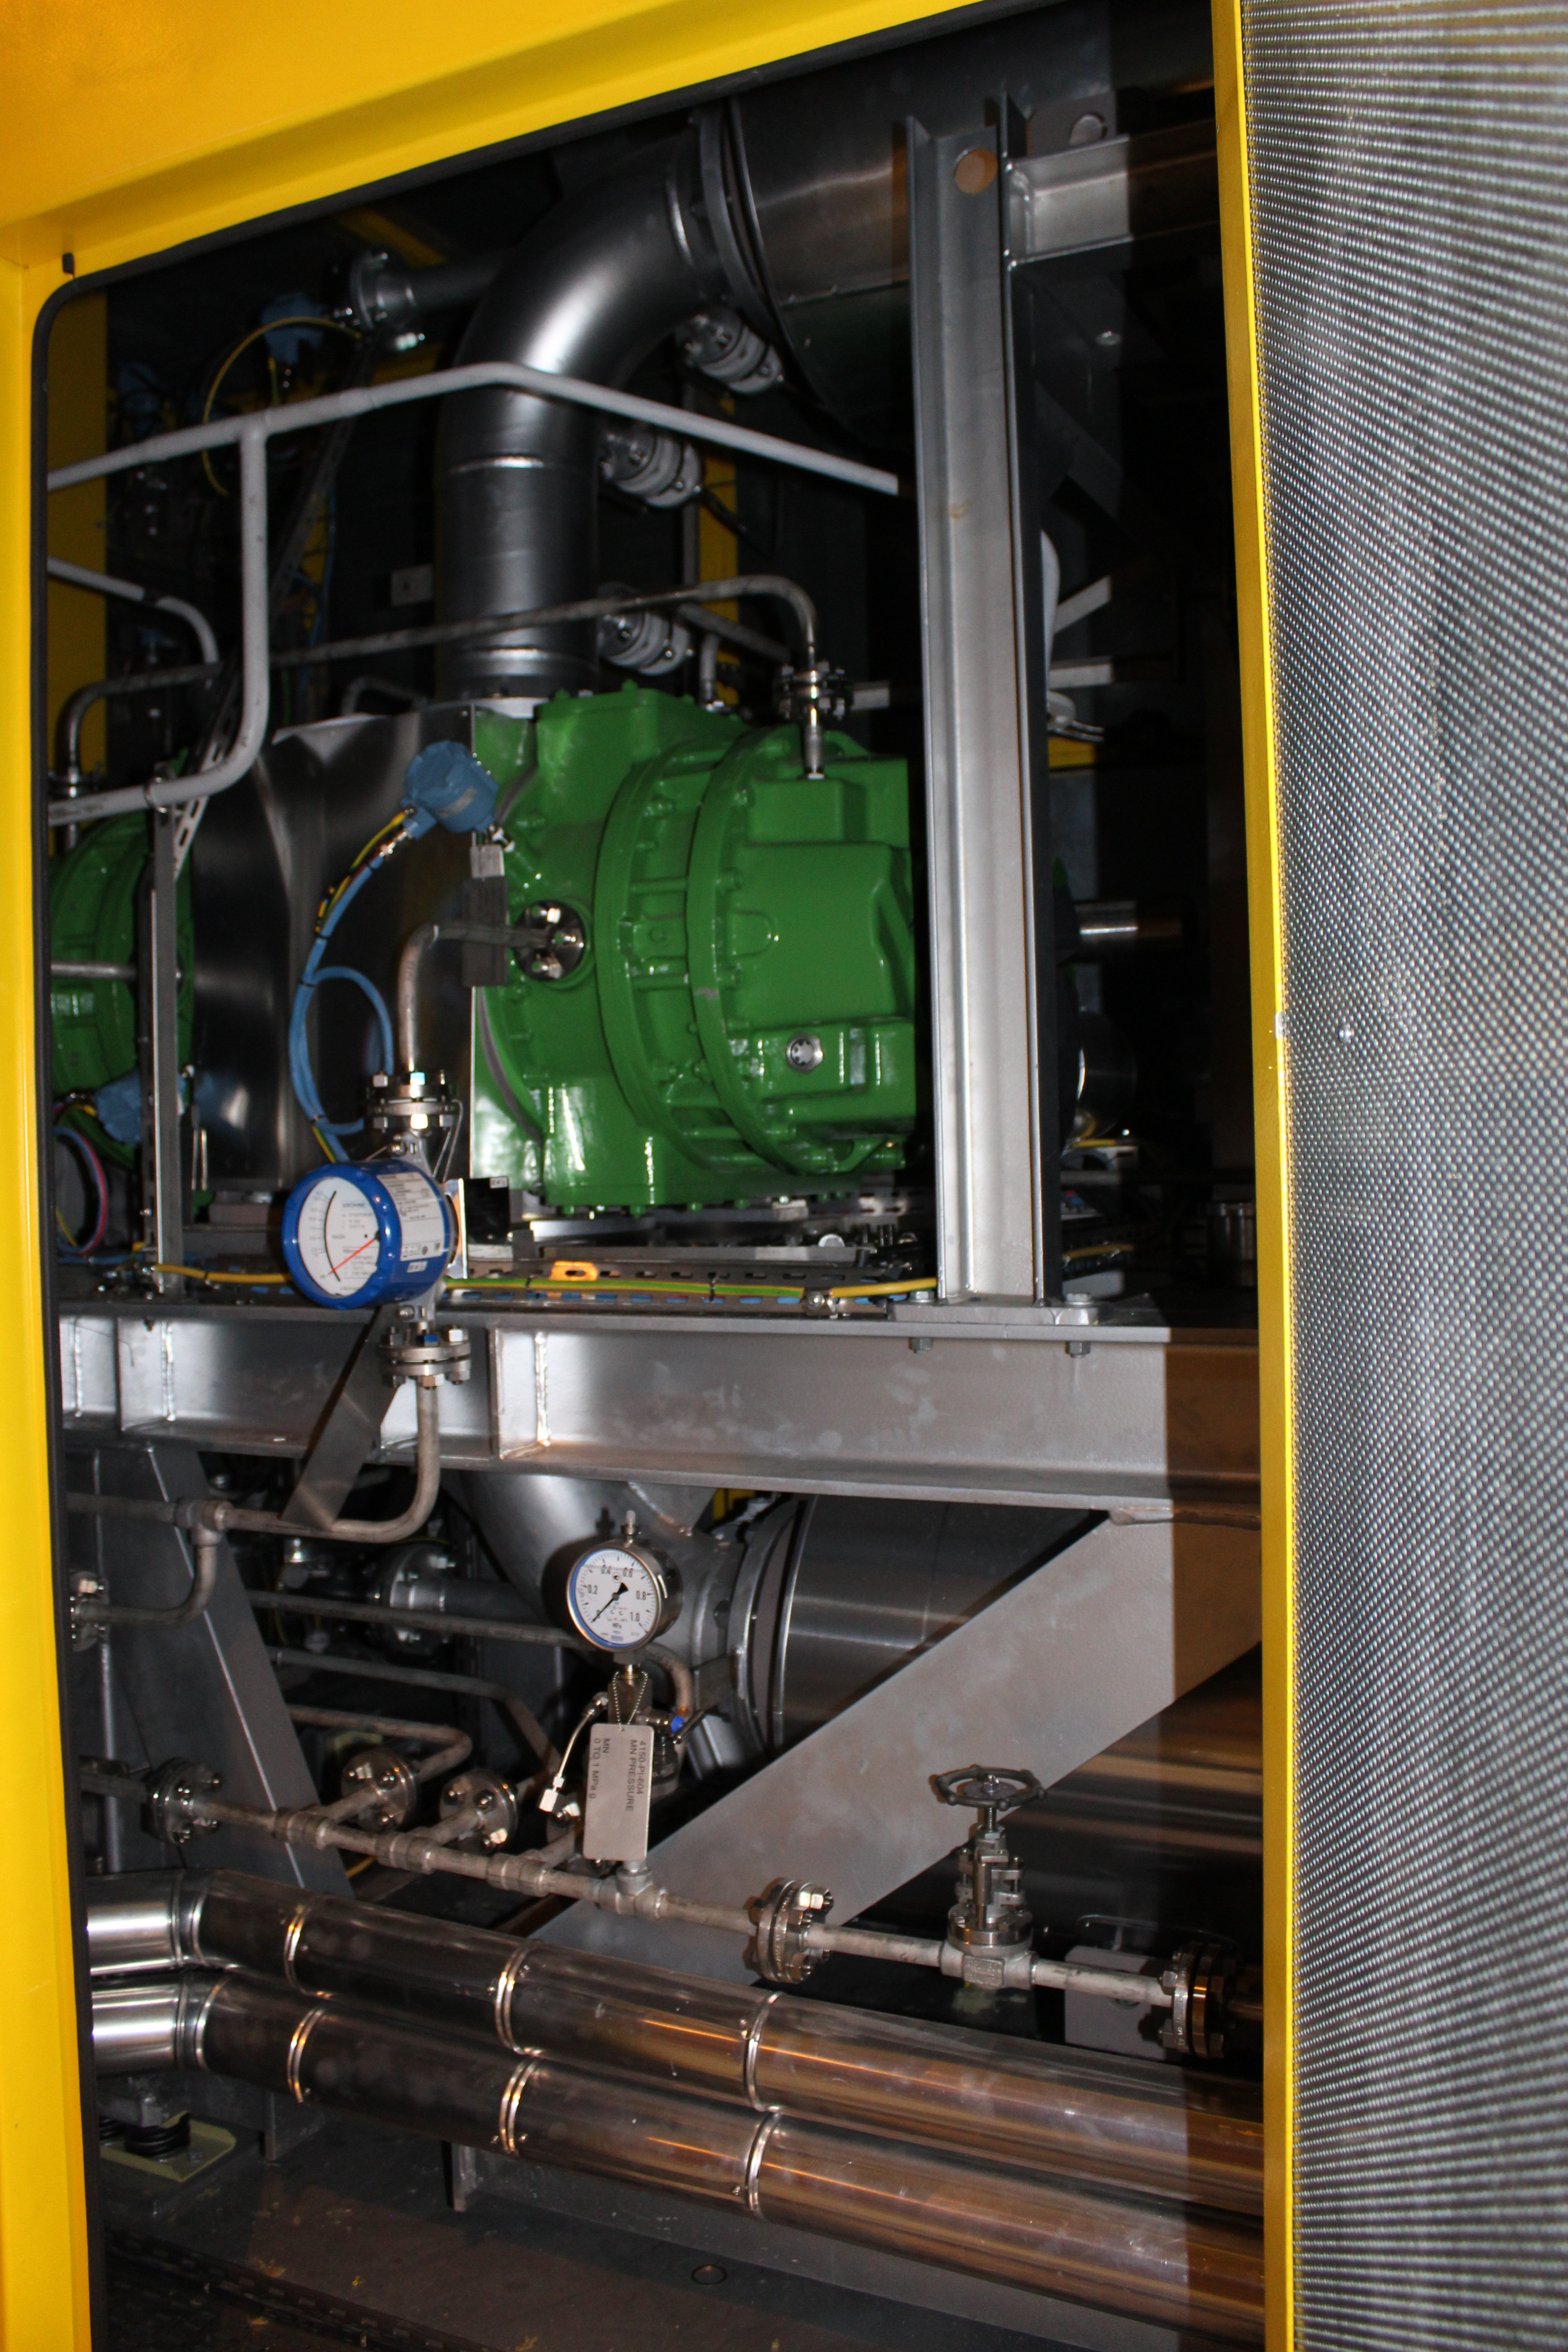 Interior of an acoustic enclosure containing a Hibon process gas blower unit with all its instrumentation tailored to customer specifications for chemical industry application.